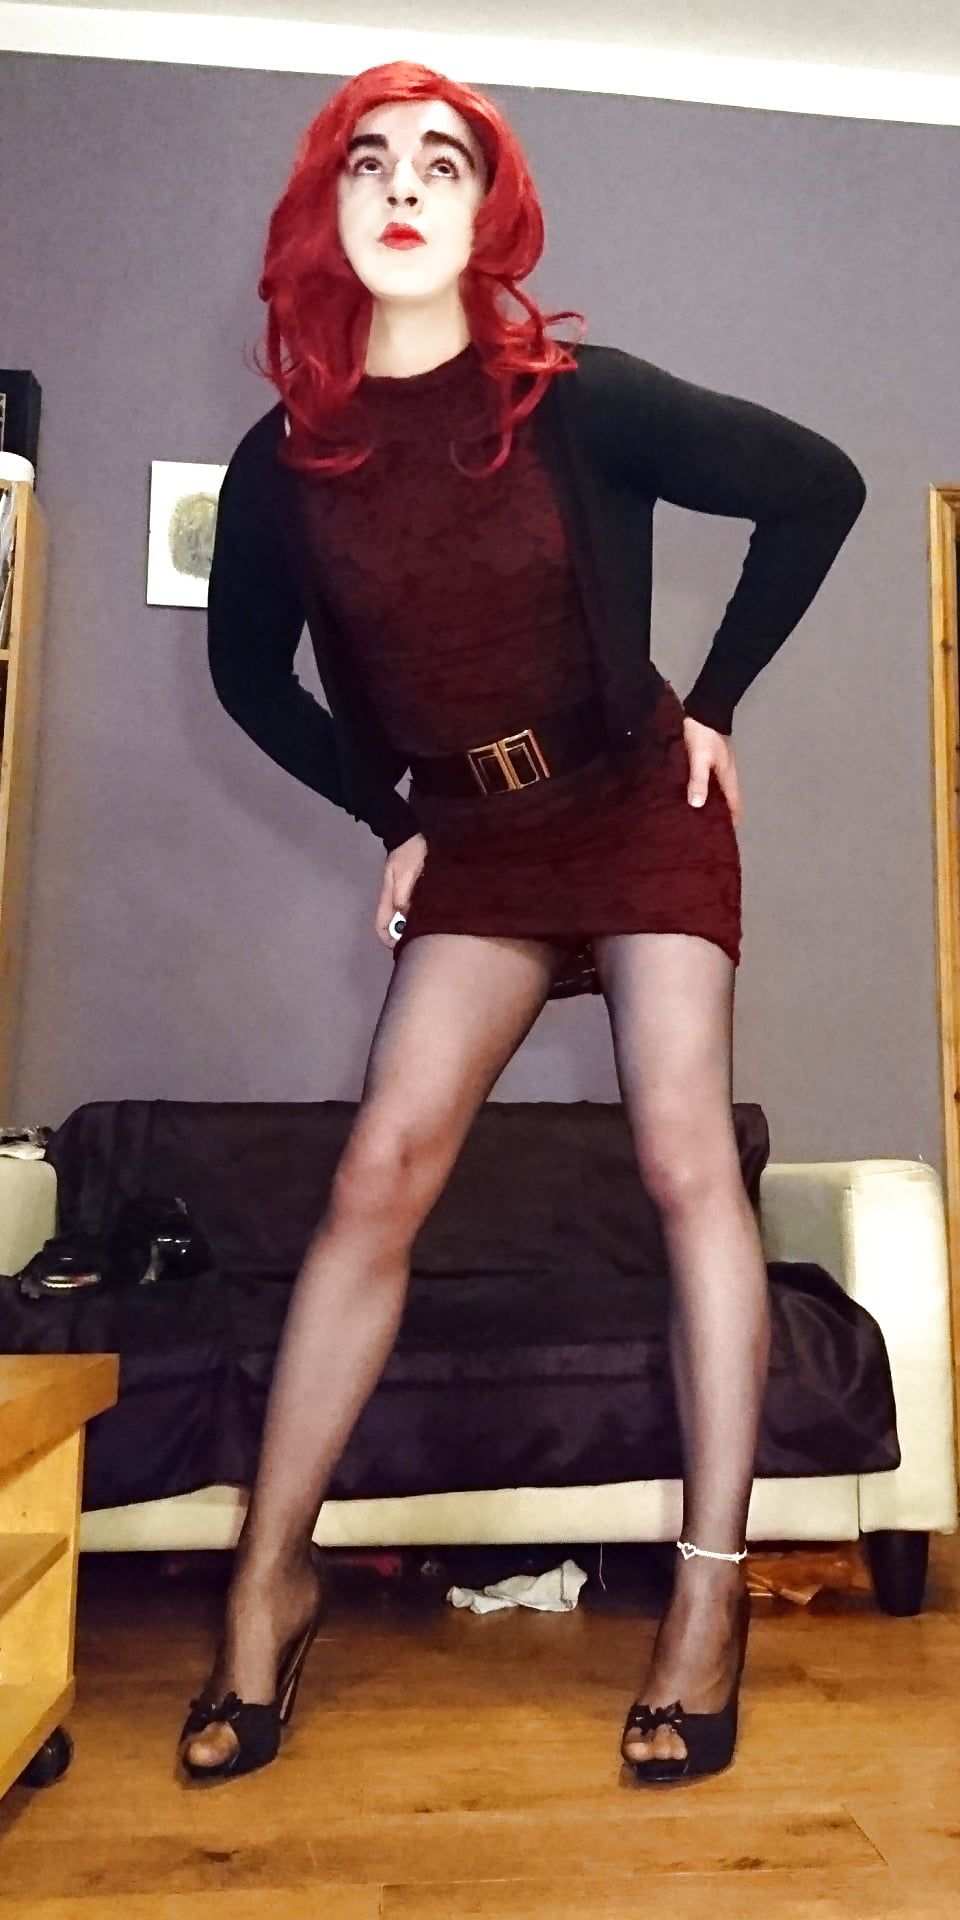 Marie crossdresser in red lace dress and sheer pantyhose